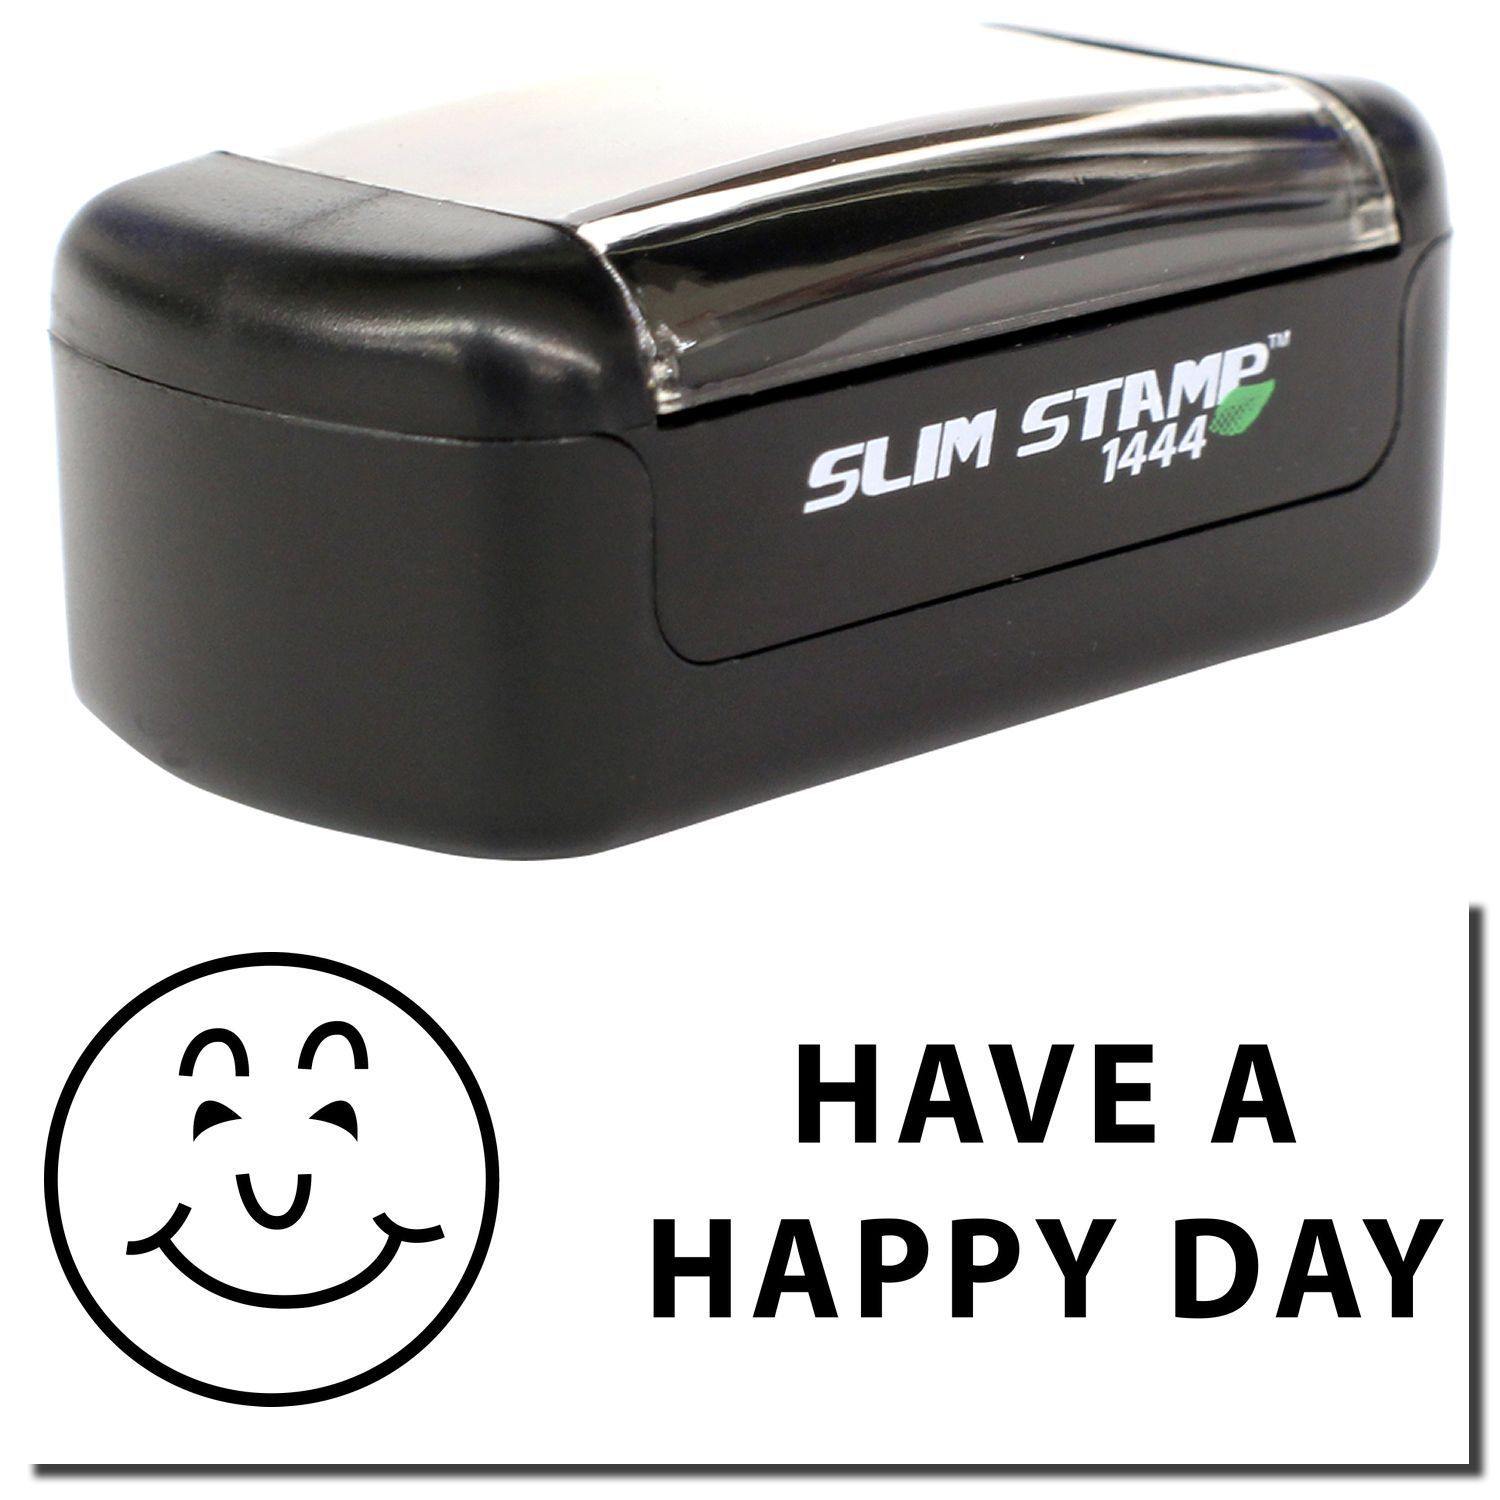 A stock office pre-inked stamp with a stamped image showing how the text "HAVE A HAPPY DAY" with a smiling face icon on the left side is displayed after stamping.